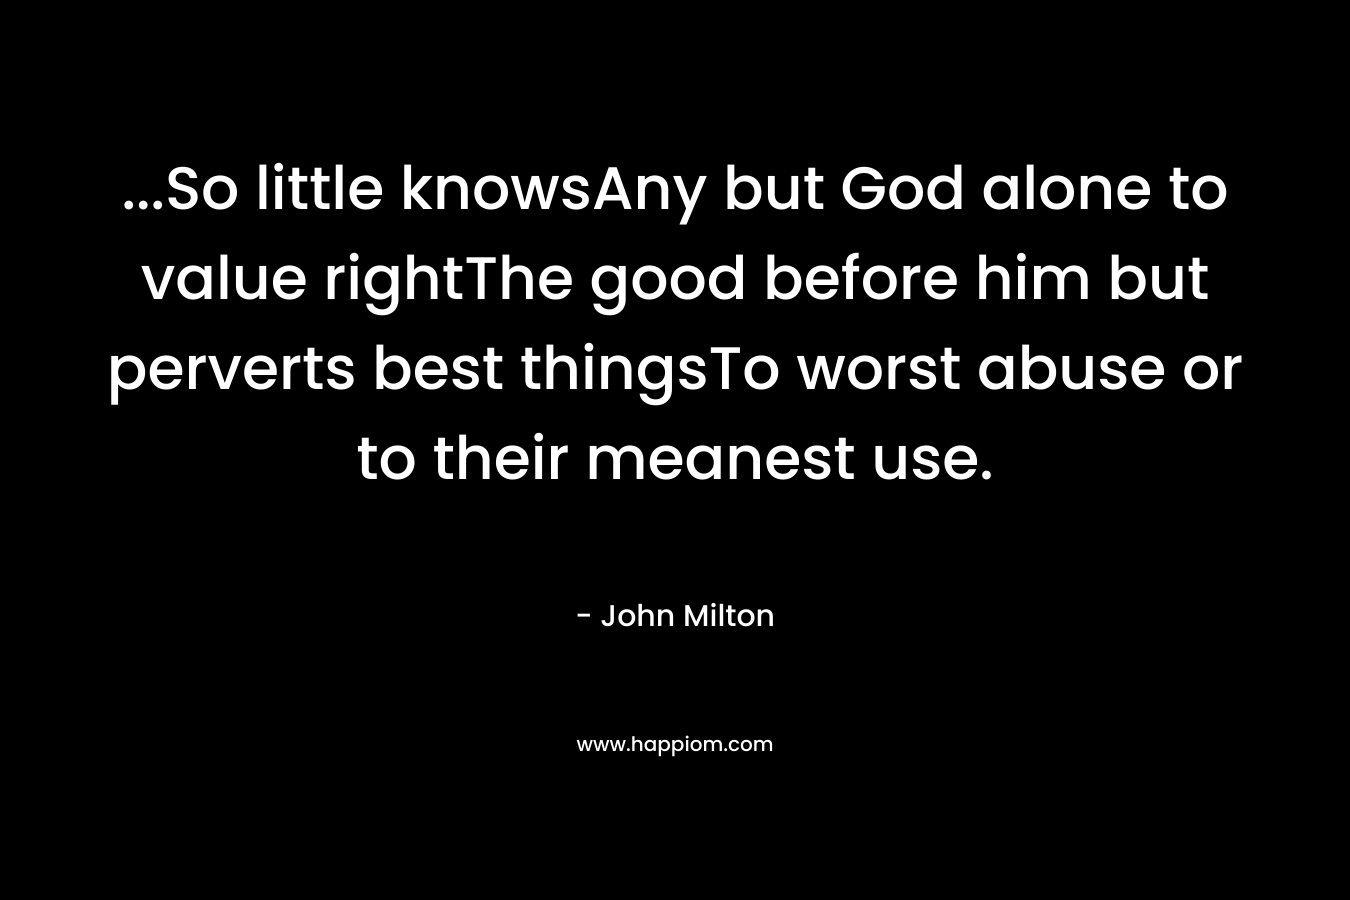 ...So little knowsAny but God alone to value rightThe good before him but perverts best thingsTo worst abuse or to their meanest use.